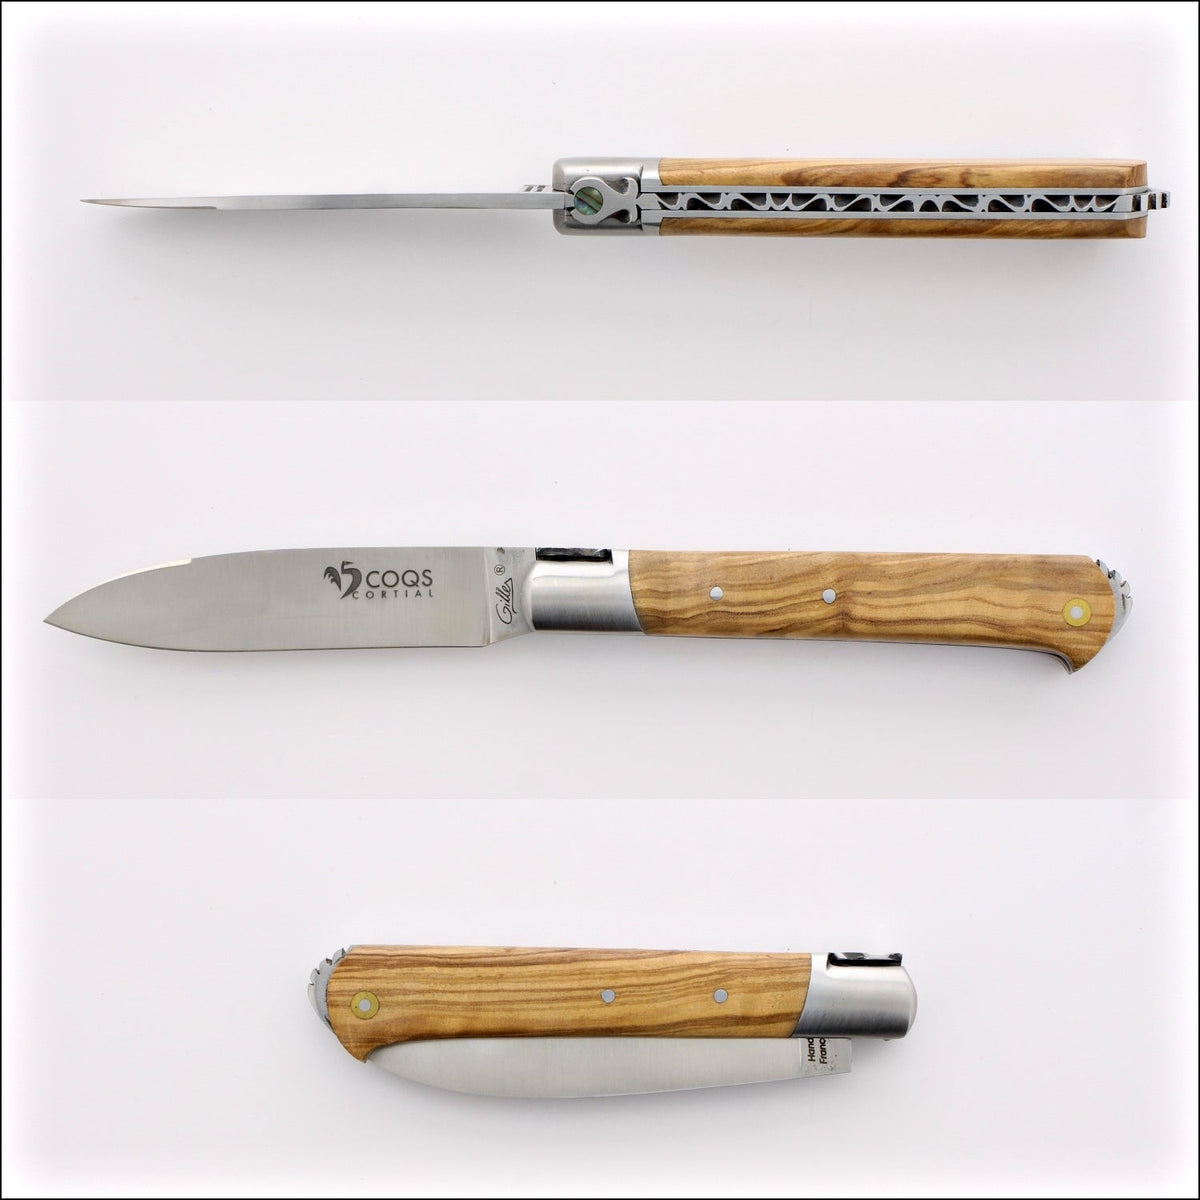 5 Coqs Pocket Knife - Olive Wood &amp; Mother of Pearl Inlay